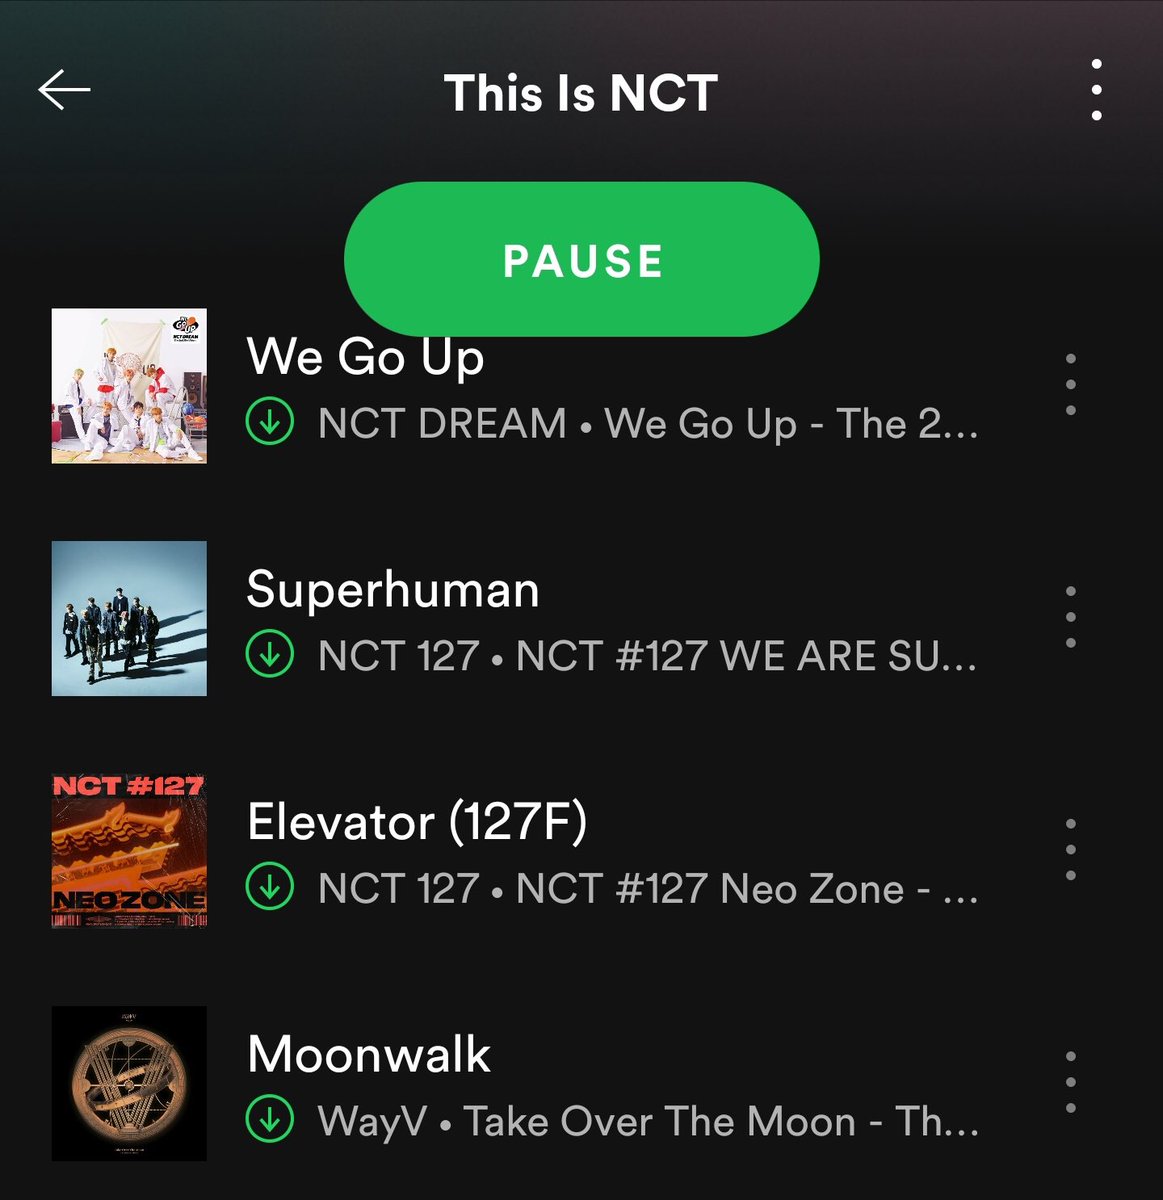 Separatists have also emailed Spotify to complain about WayV’s songs listed in the “This is NCT” playlist back in April, which was a new addition. They requested that WayV be removed from the NCT playlist and put in their own.